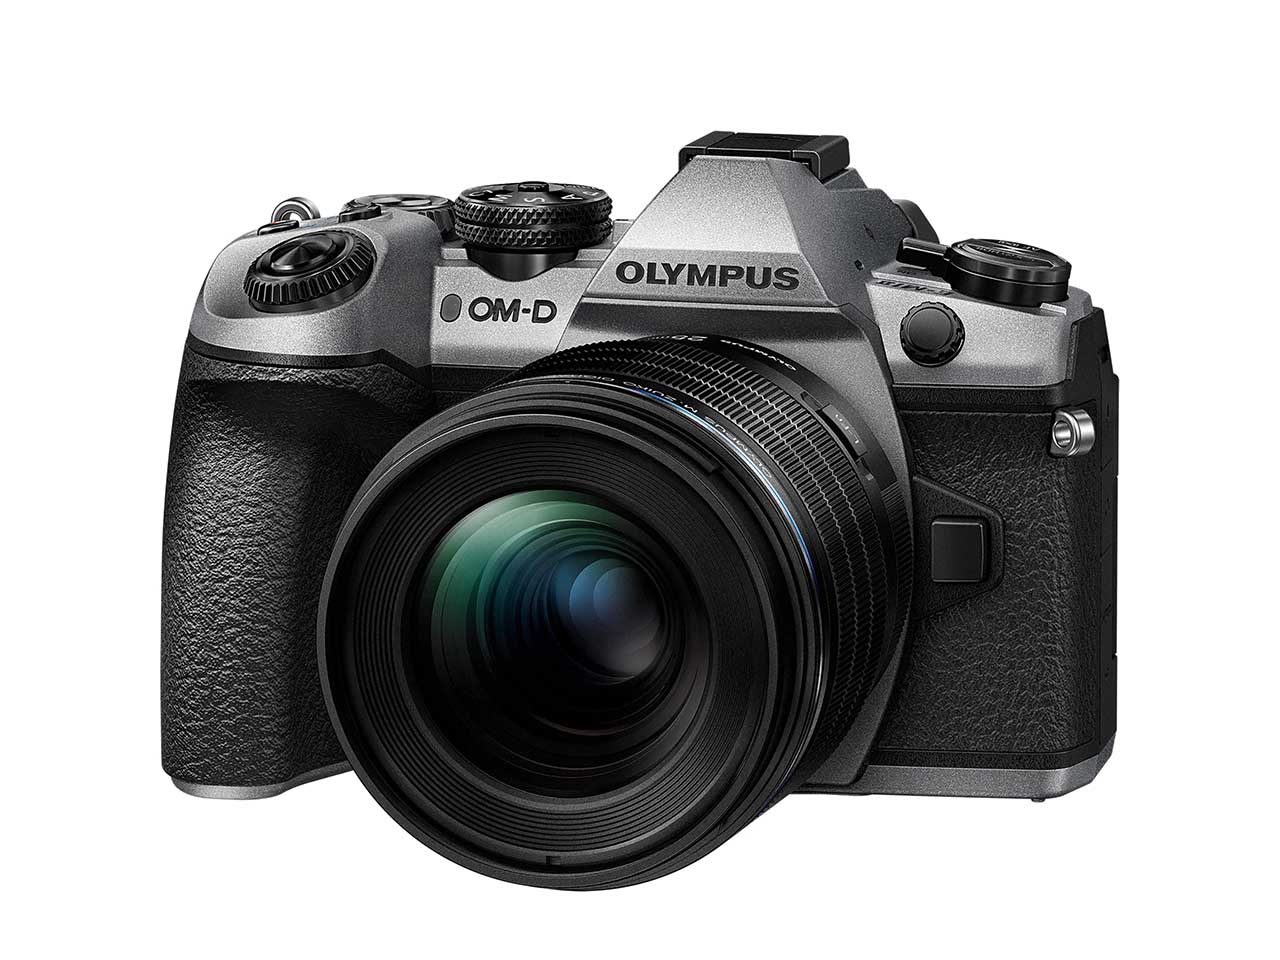 Olympus OM-D E-M1 III: possible specifications and what we’d like to see